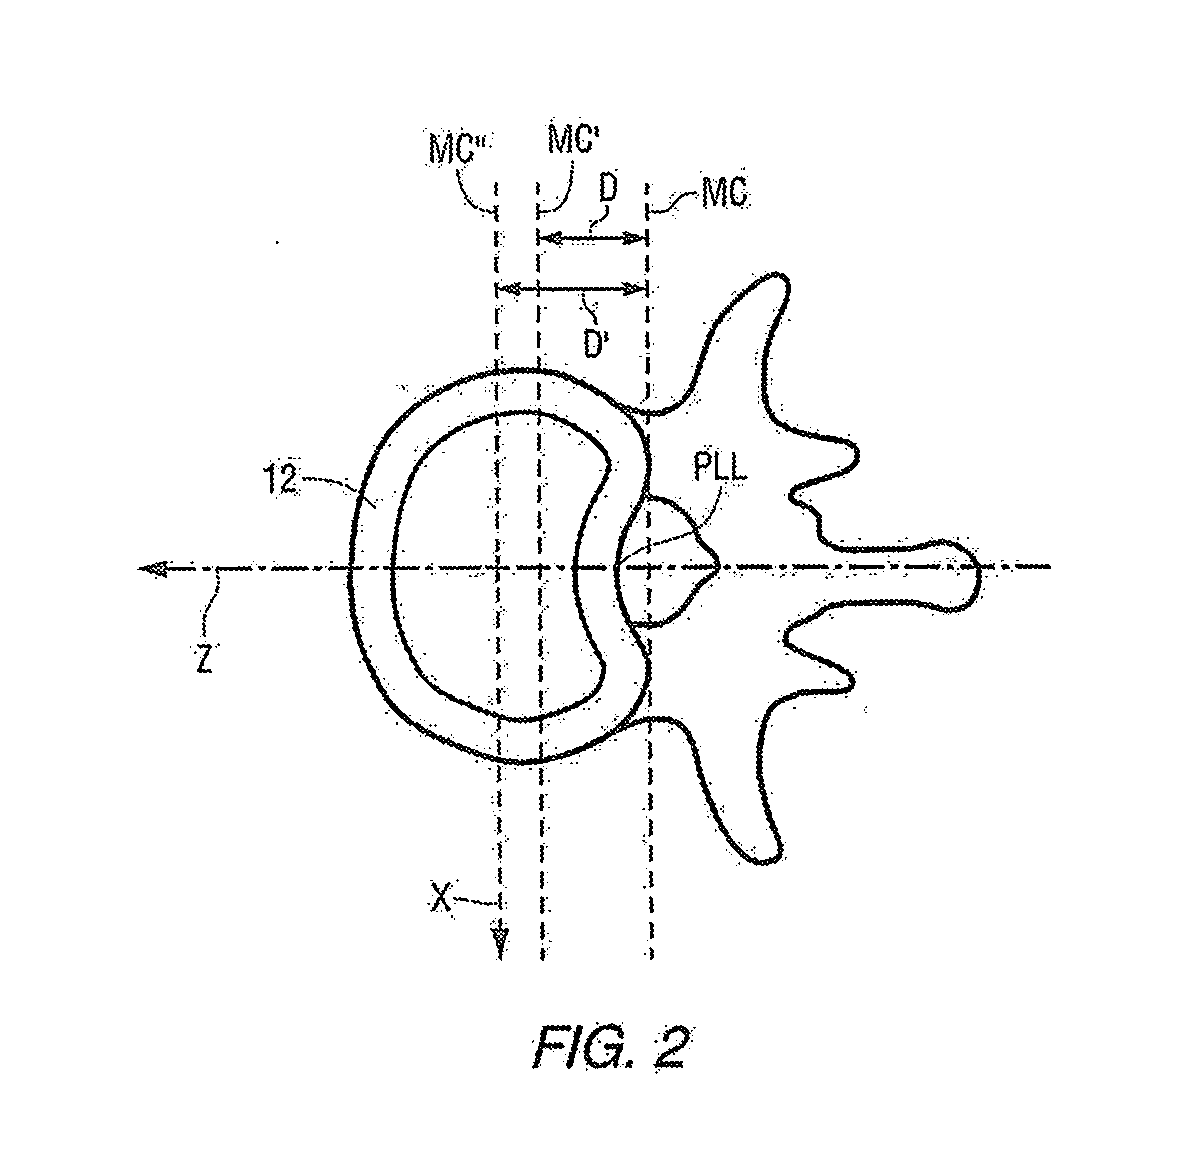 Methods and apparatus for spinal reconstructive surgery and measuring spinal length and intervertebral spacing, tension and rotation